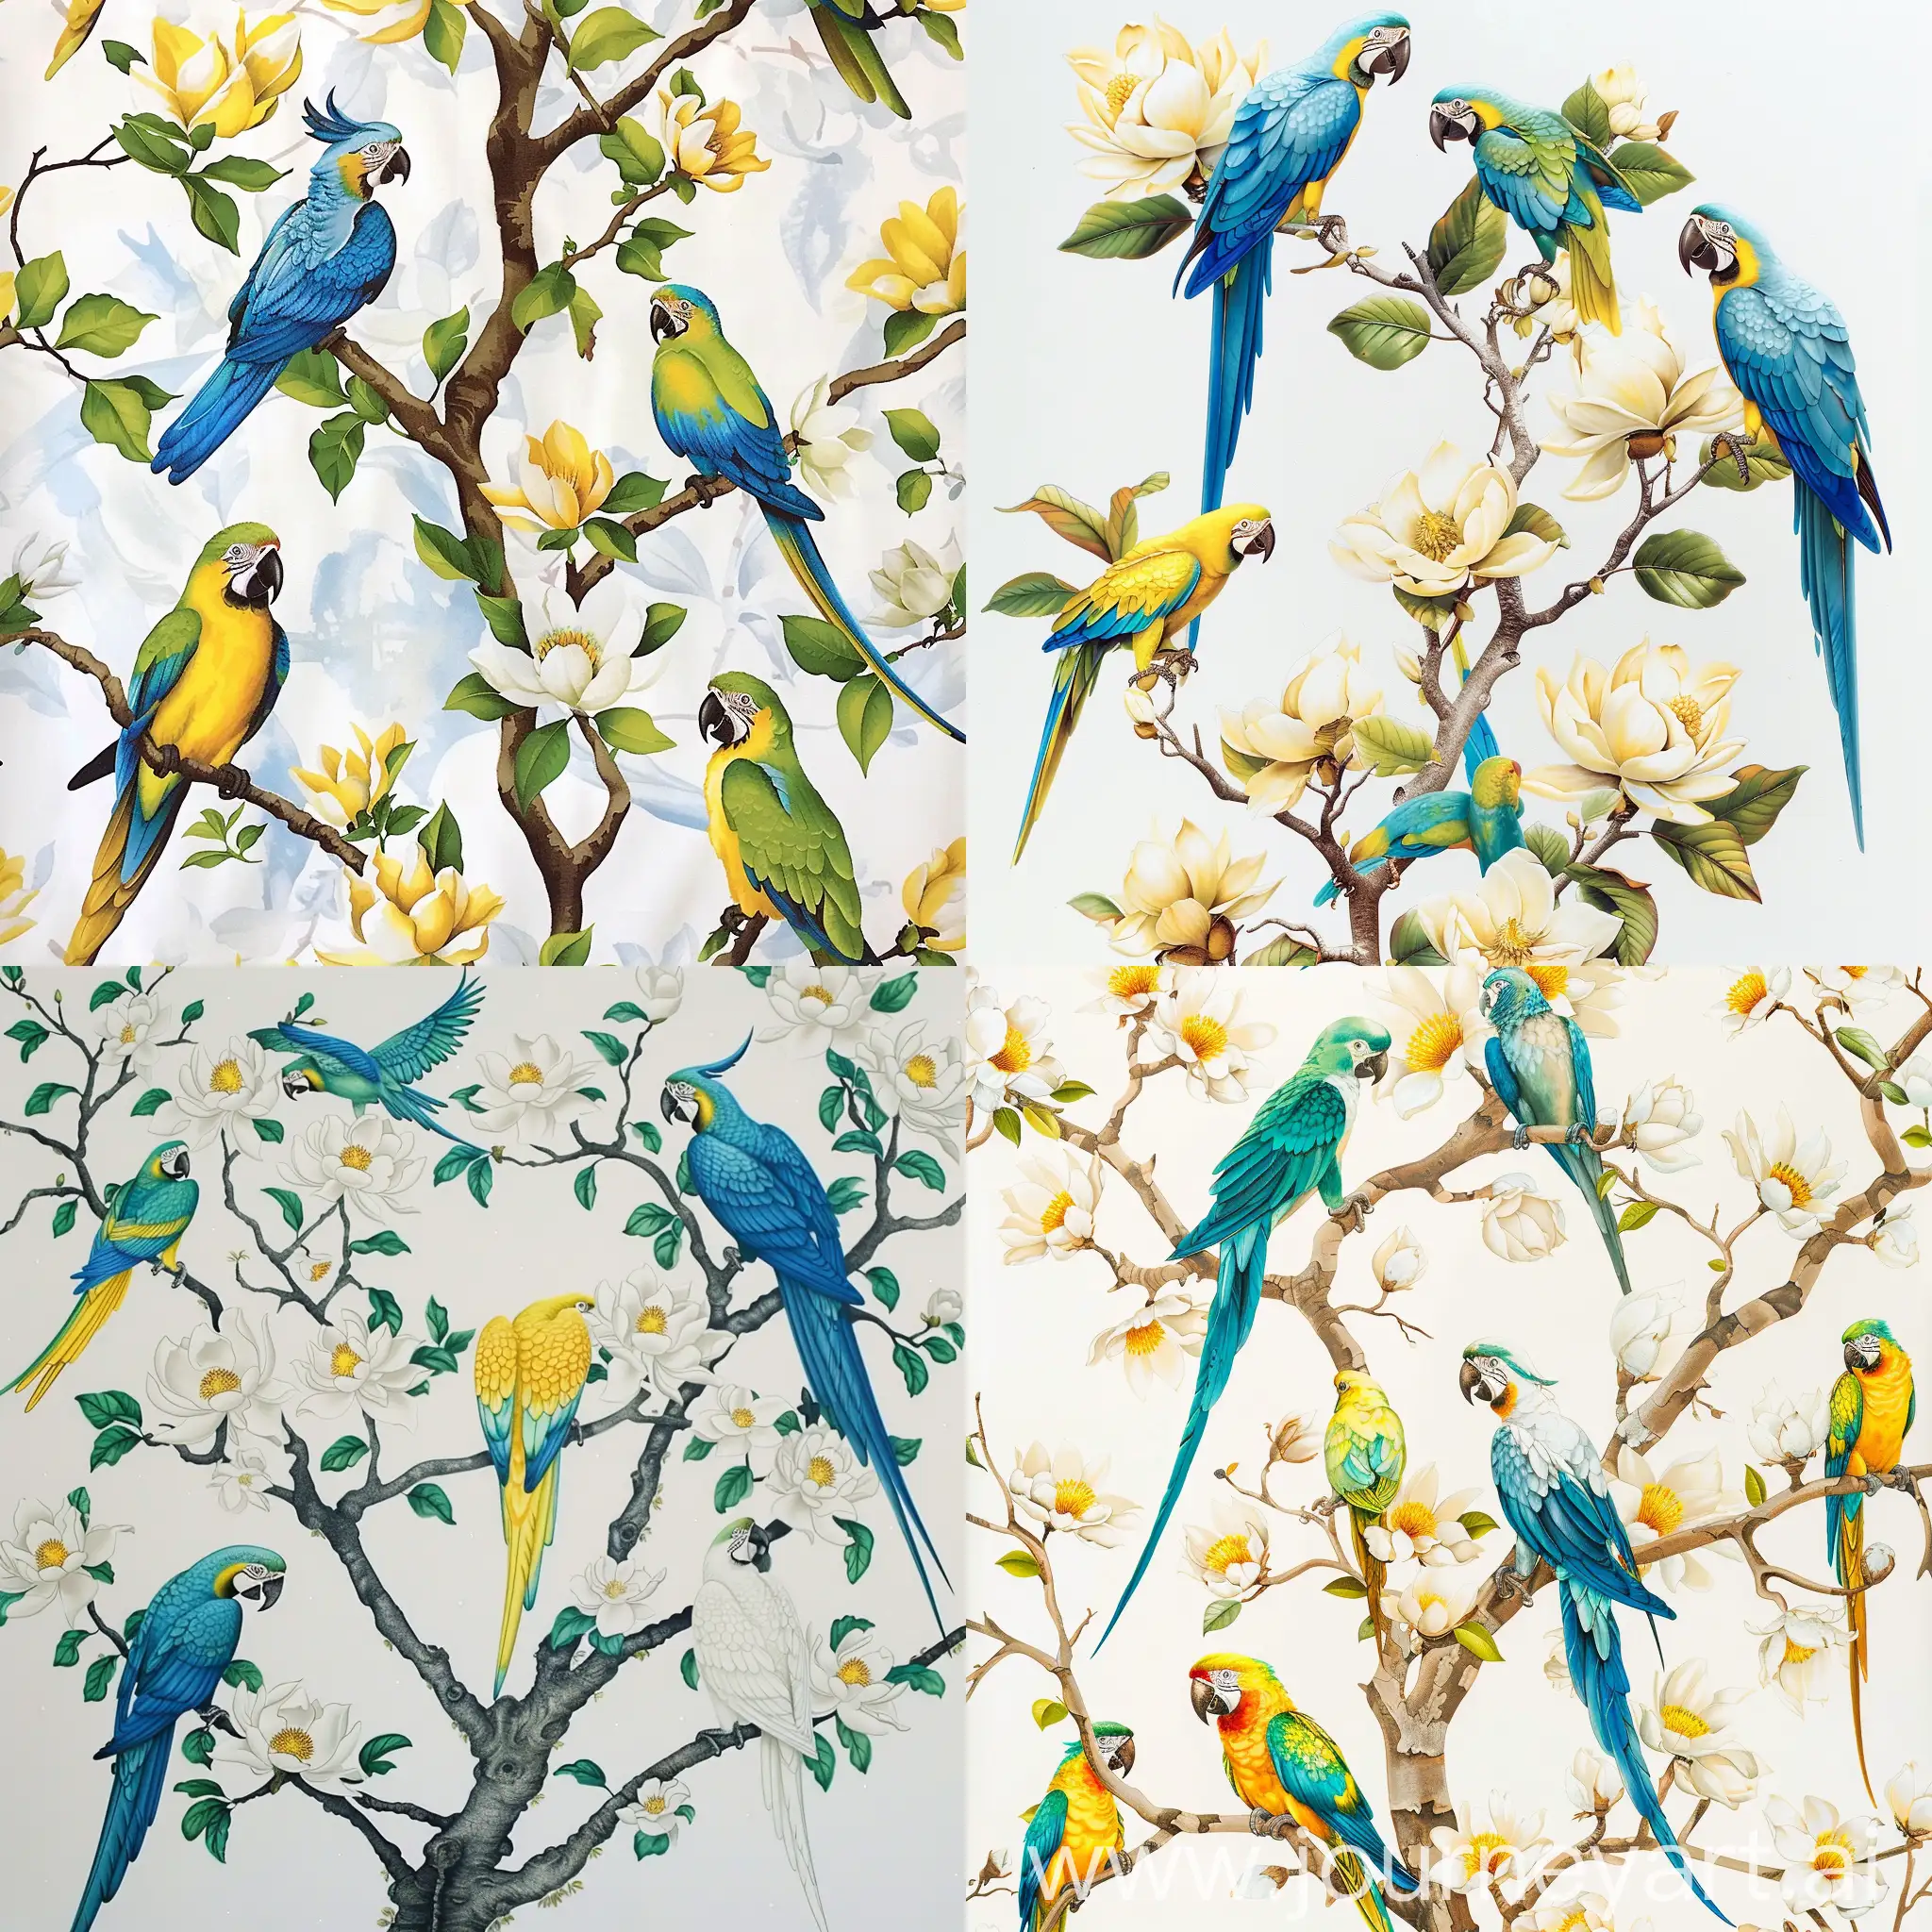 Magnolia blossom tree and parrots in blue,yellow ,green ,turquoise on white background